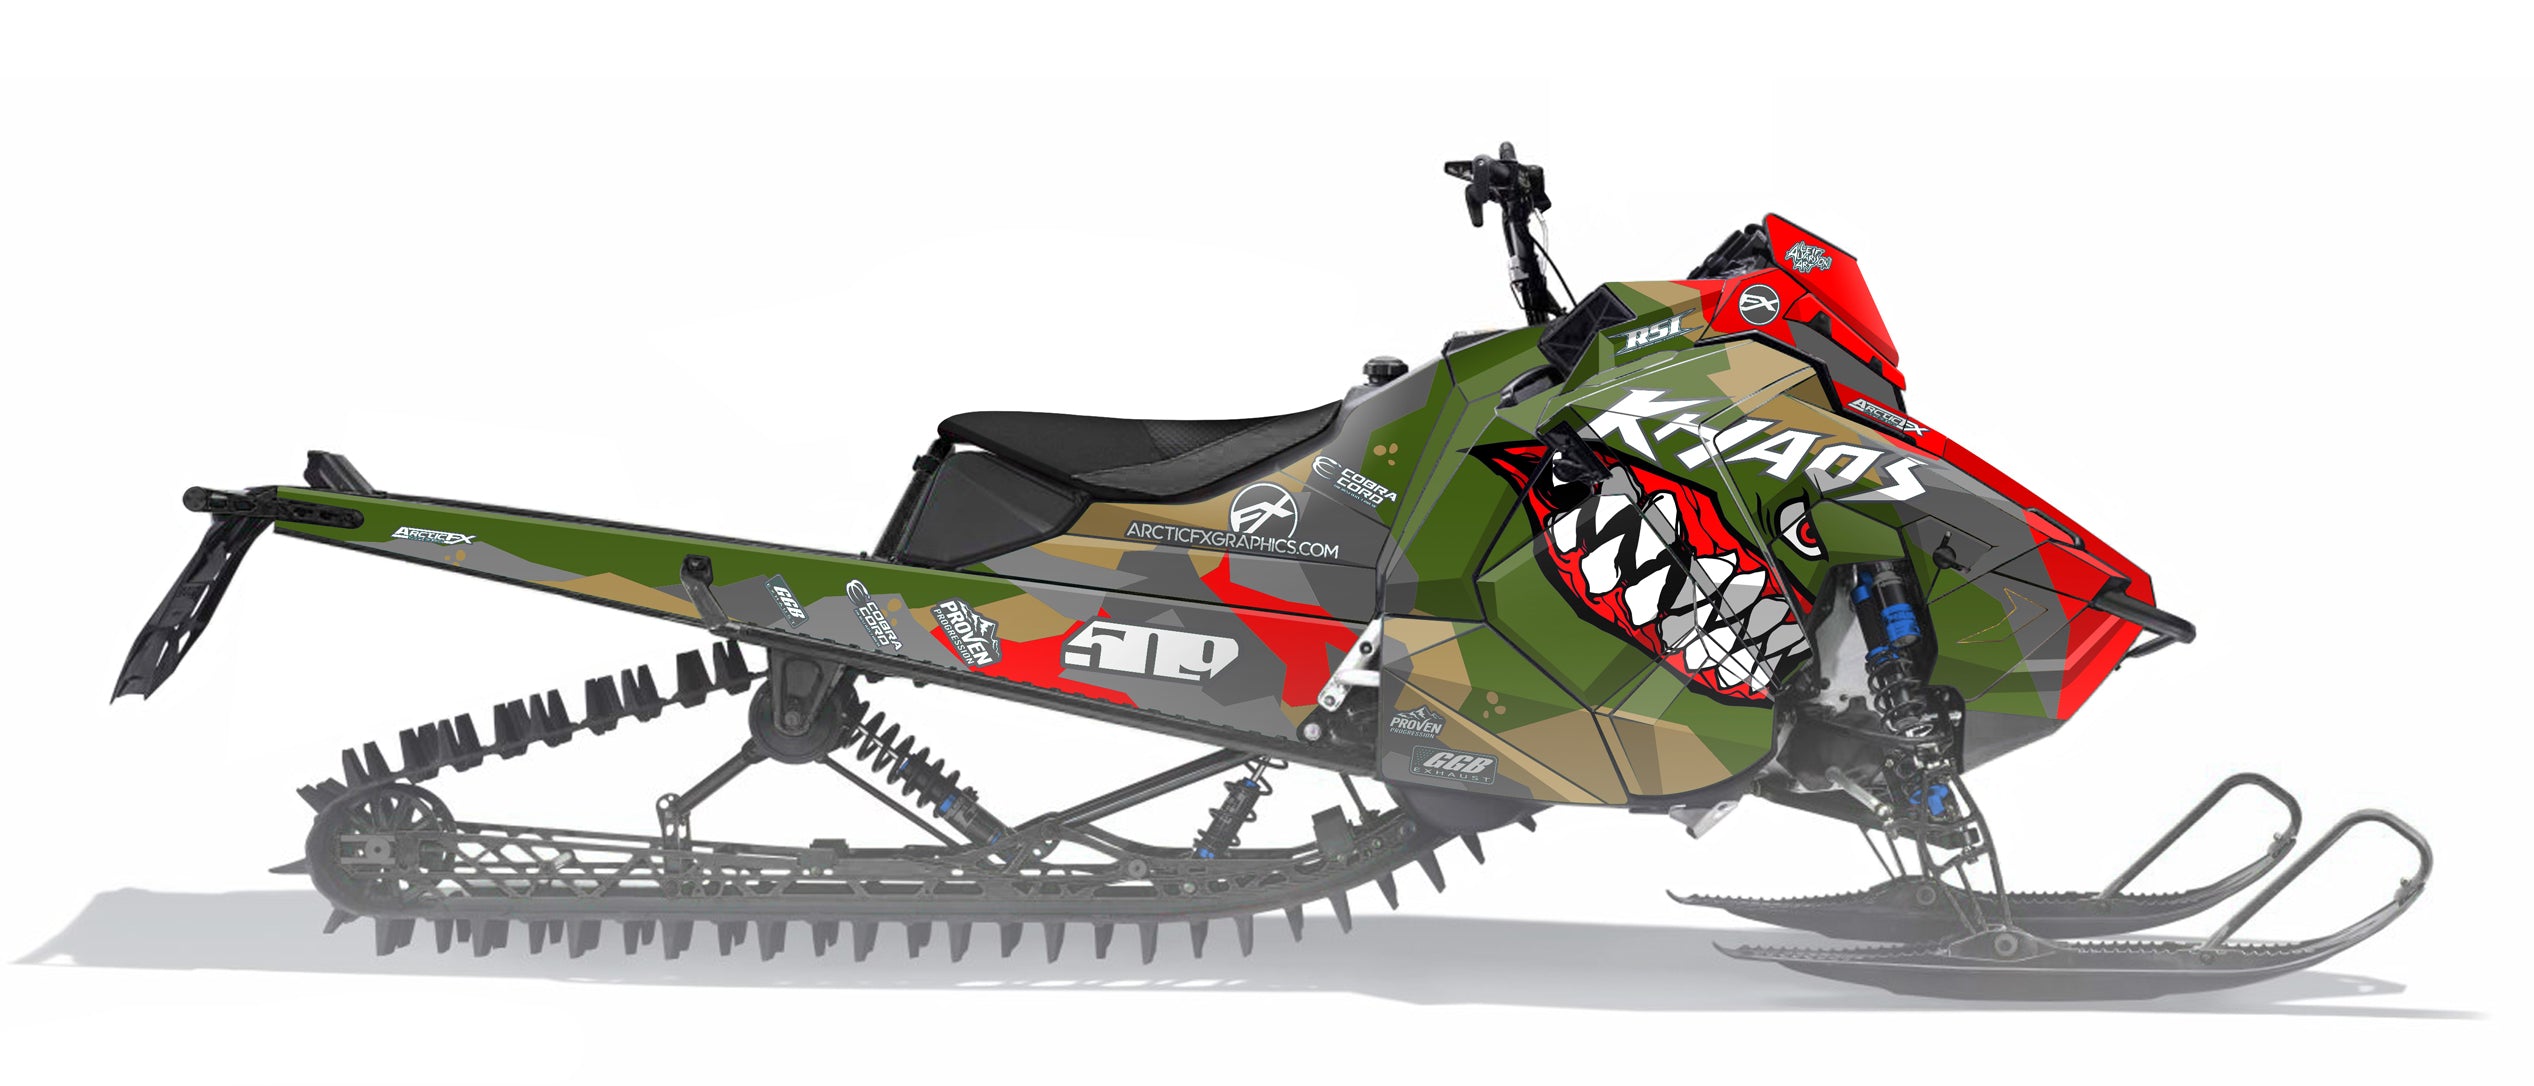 shark mouth teeth on the od green and red curtiss p-40 warhawk inspired design on a polaris snowmobile > Polaris > Axys > Sled > Wraps > Polaris axys sled wraps > Arcticfx graphics > Leif Alvarsson Art > Snowmobile wrap > Sled wrap > Sledwrap